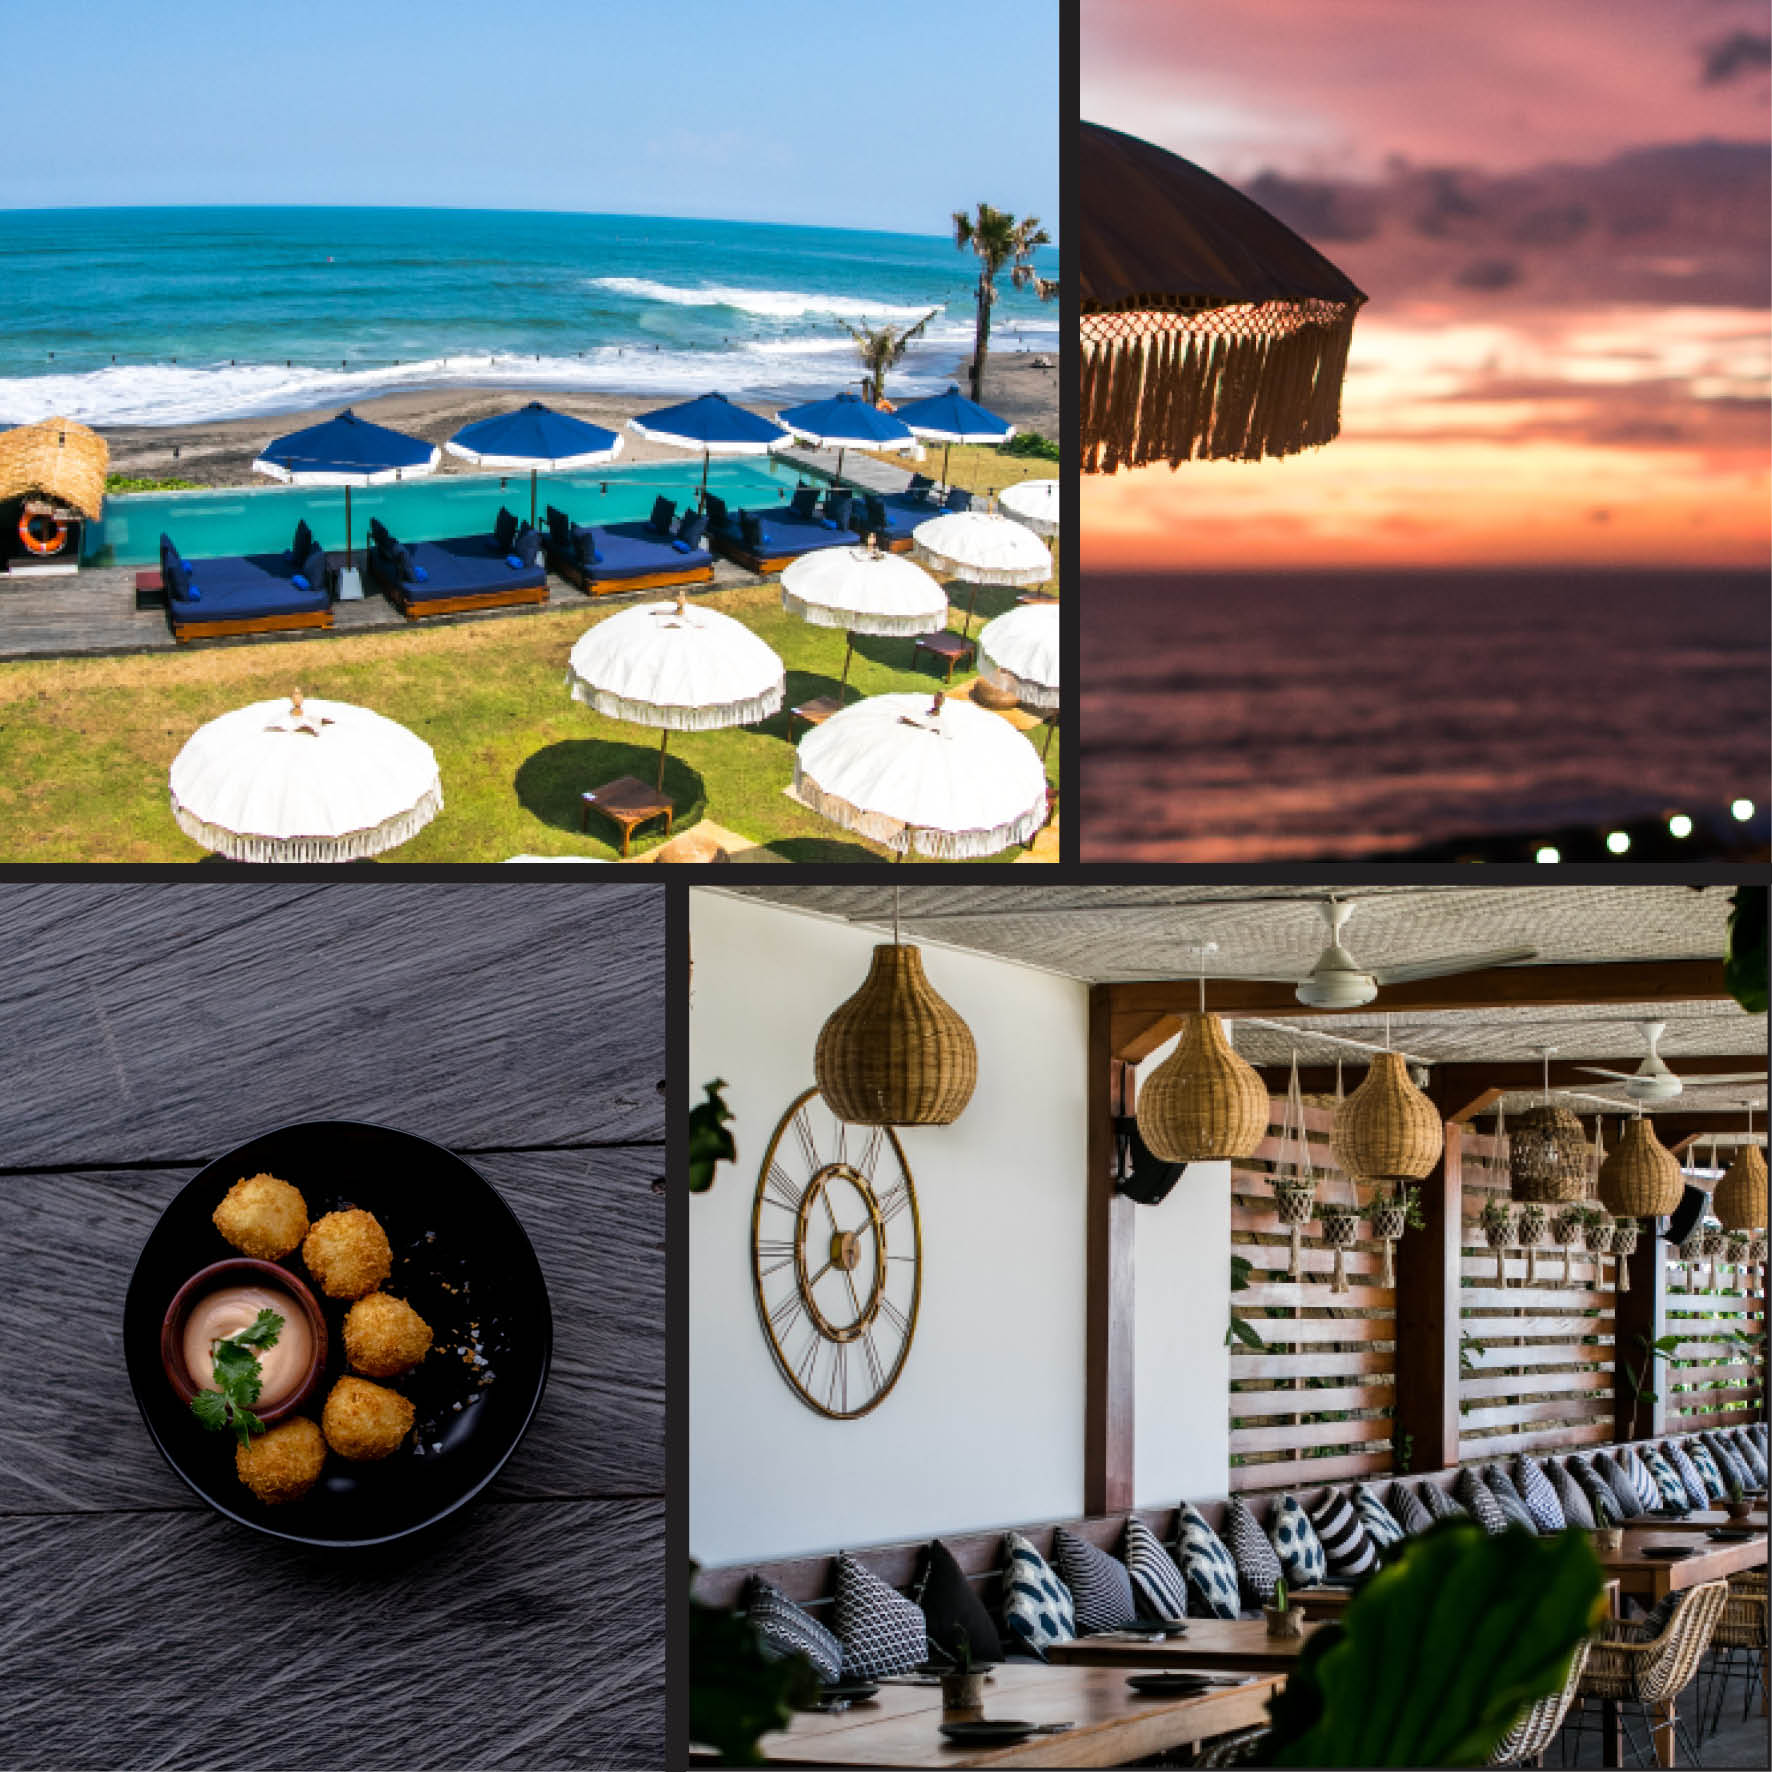 THE BEST RESTAURANTS IN CANGGU - by The Asia Collective